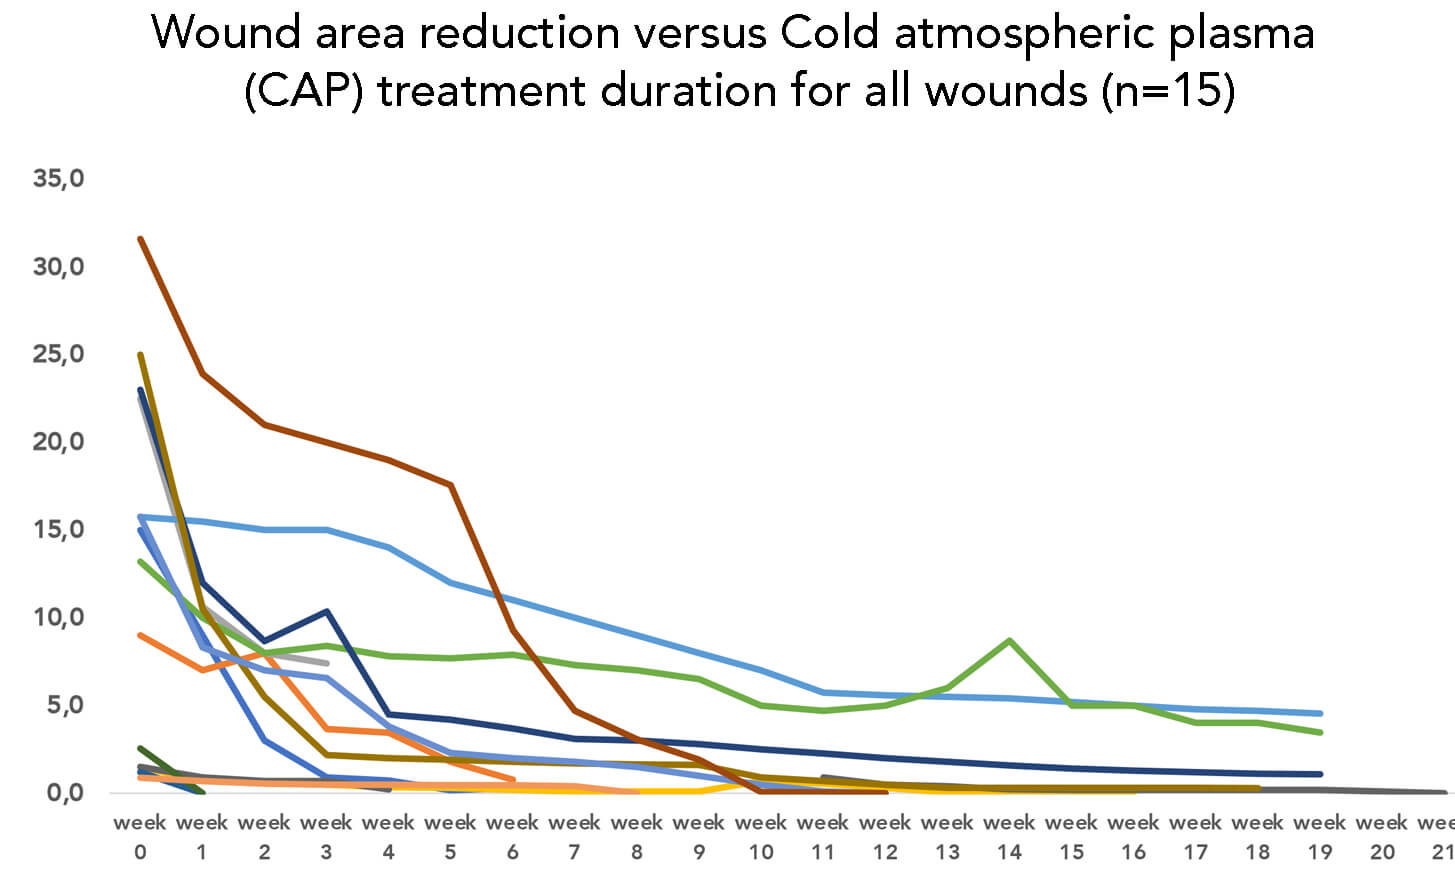 Wound area reduction versus Cold atmospheric plasma (CAP) treatment duration for all wounds (n=15)